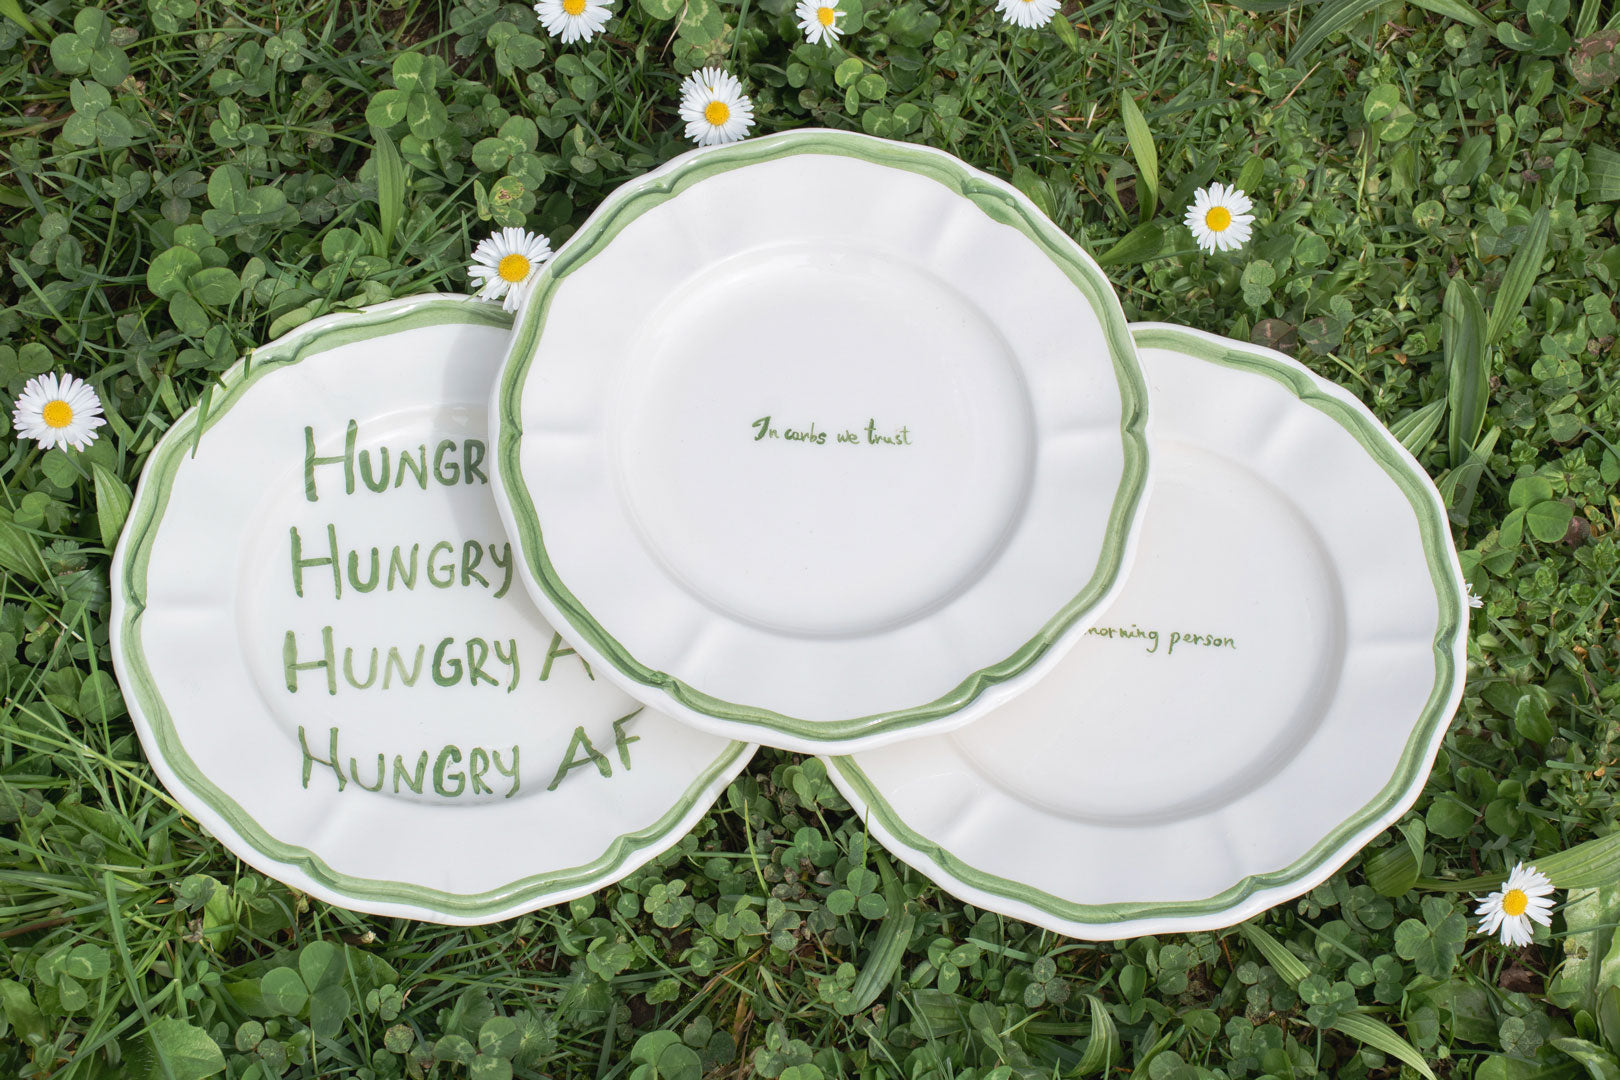 A series of white handpainted ceramic plates with green borders and whimsical food-related phrases, arranged on a bed of clover, displaying a playful approach to sustainable picnicware.